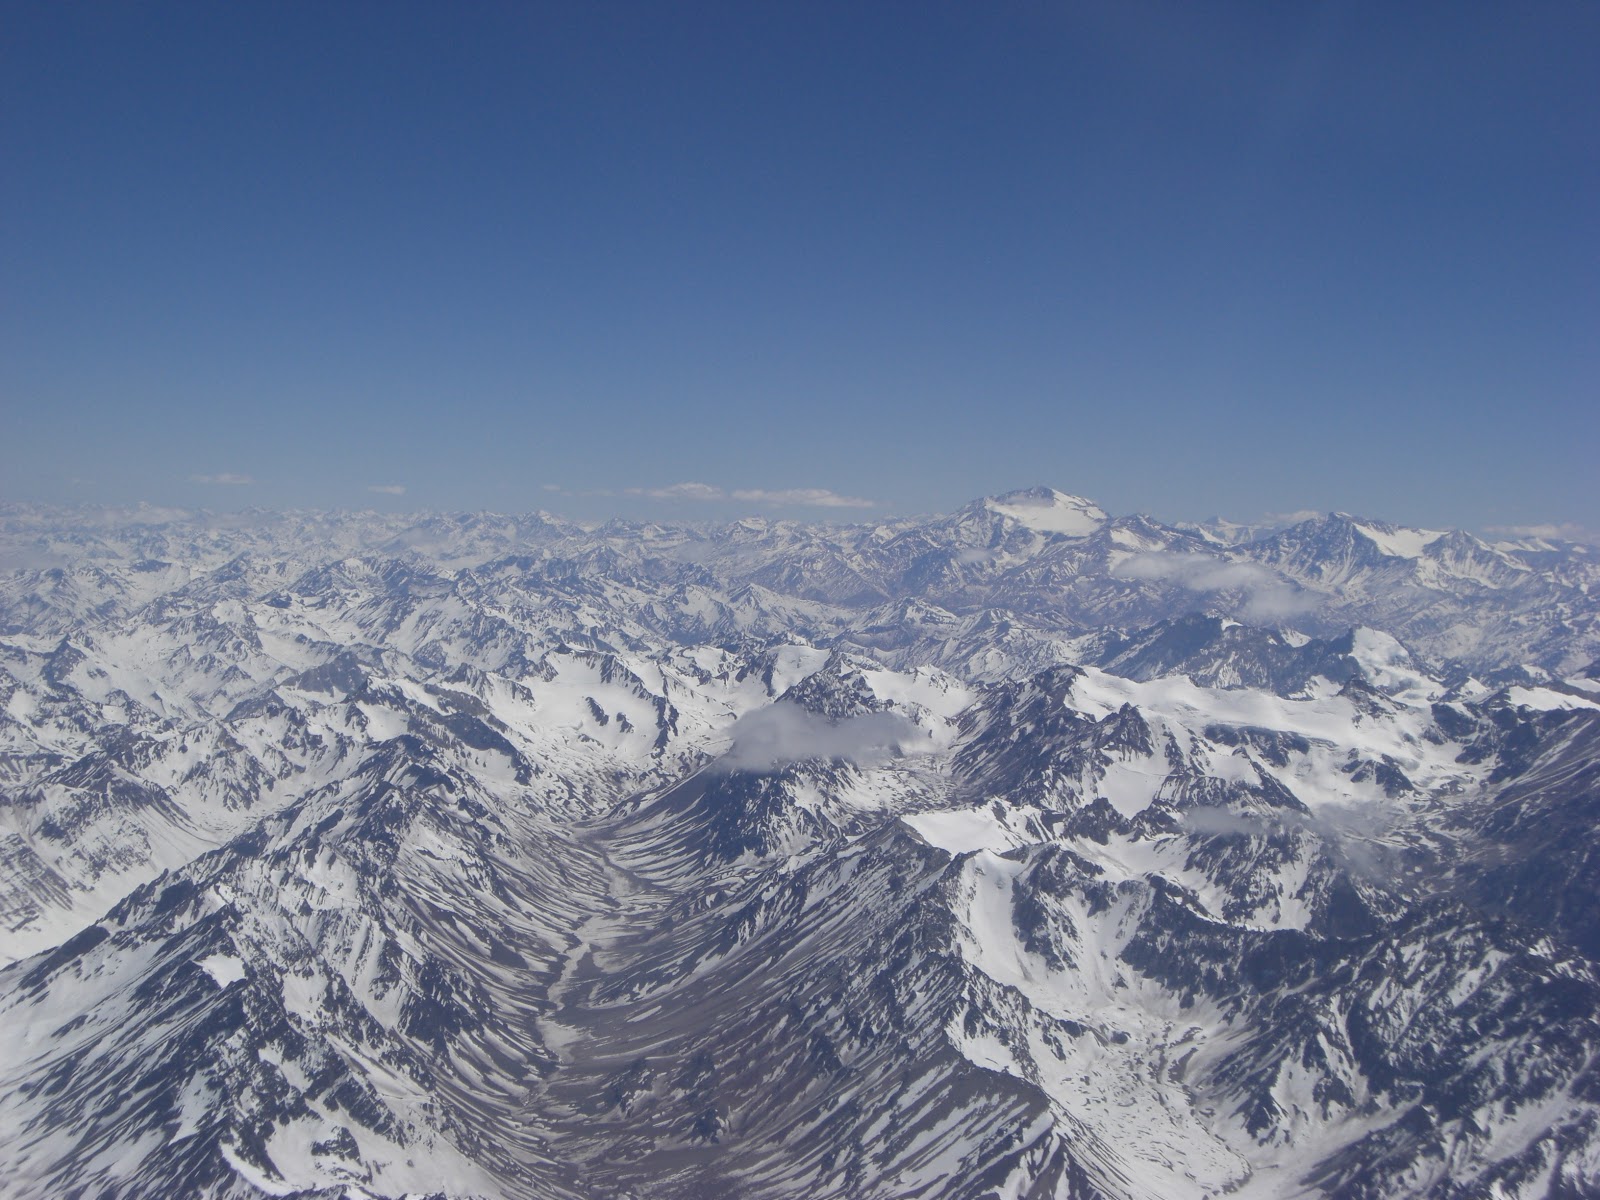 Much of Chile’s landscape is dominated by the imposing Andes mountain range. 